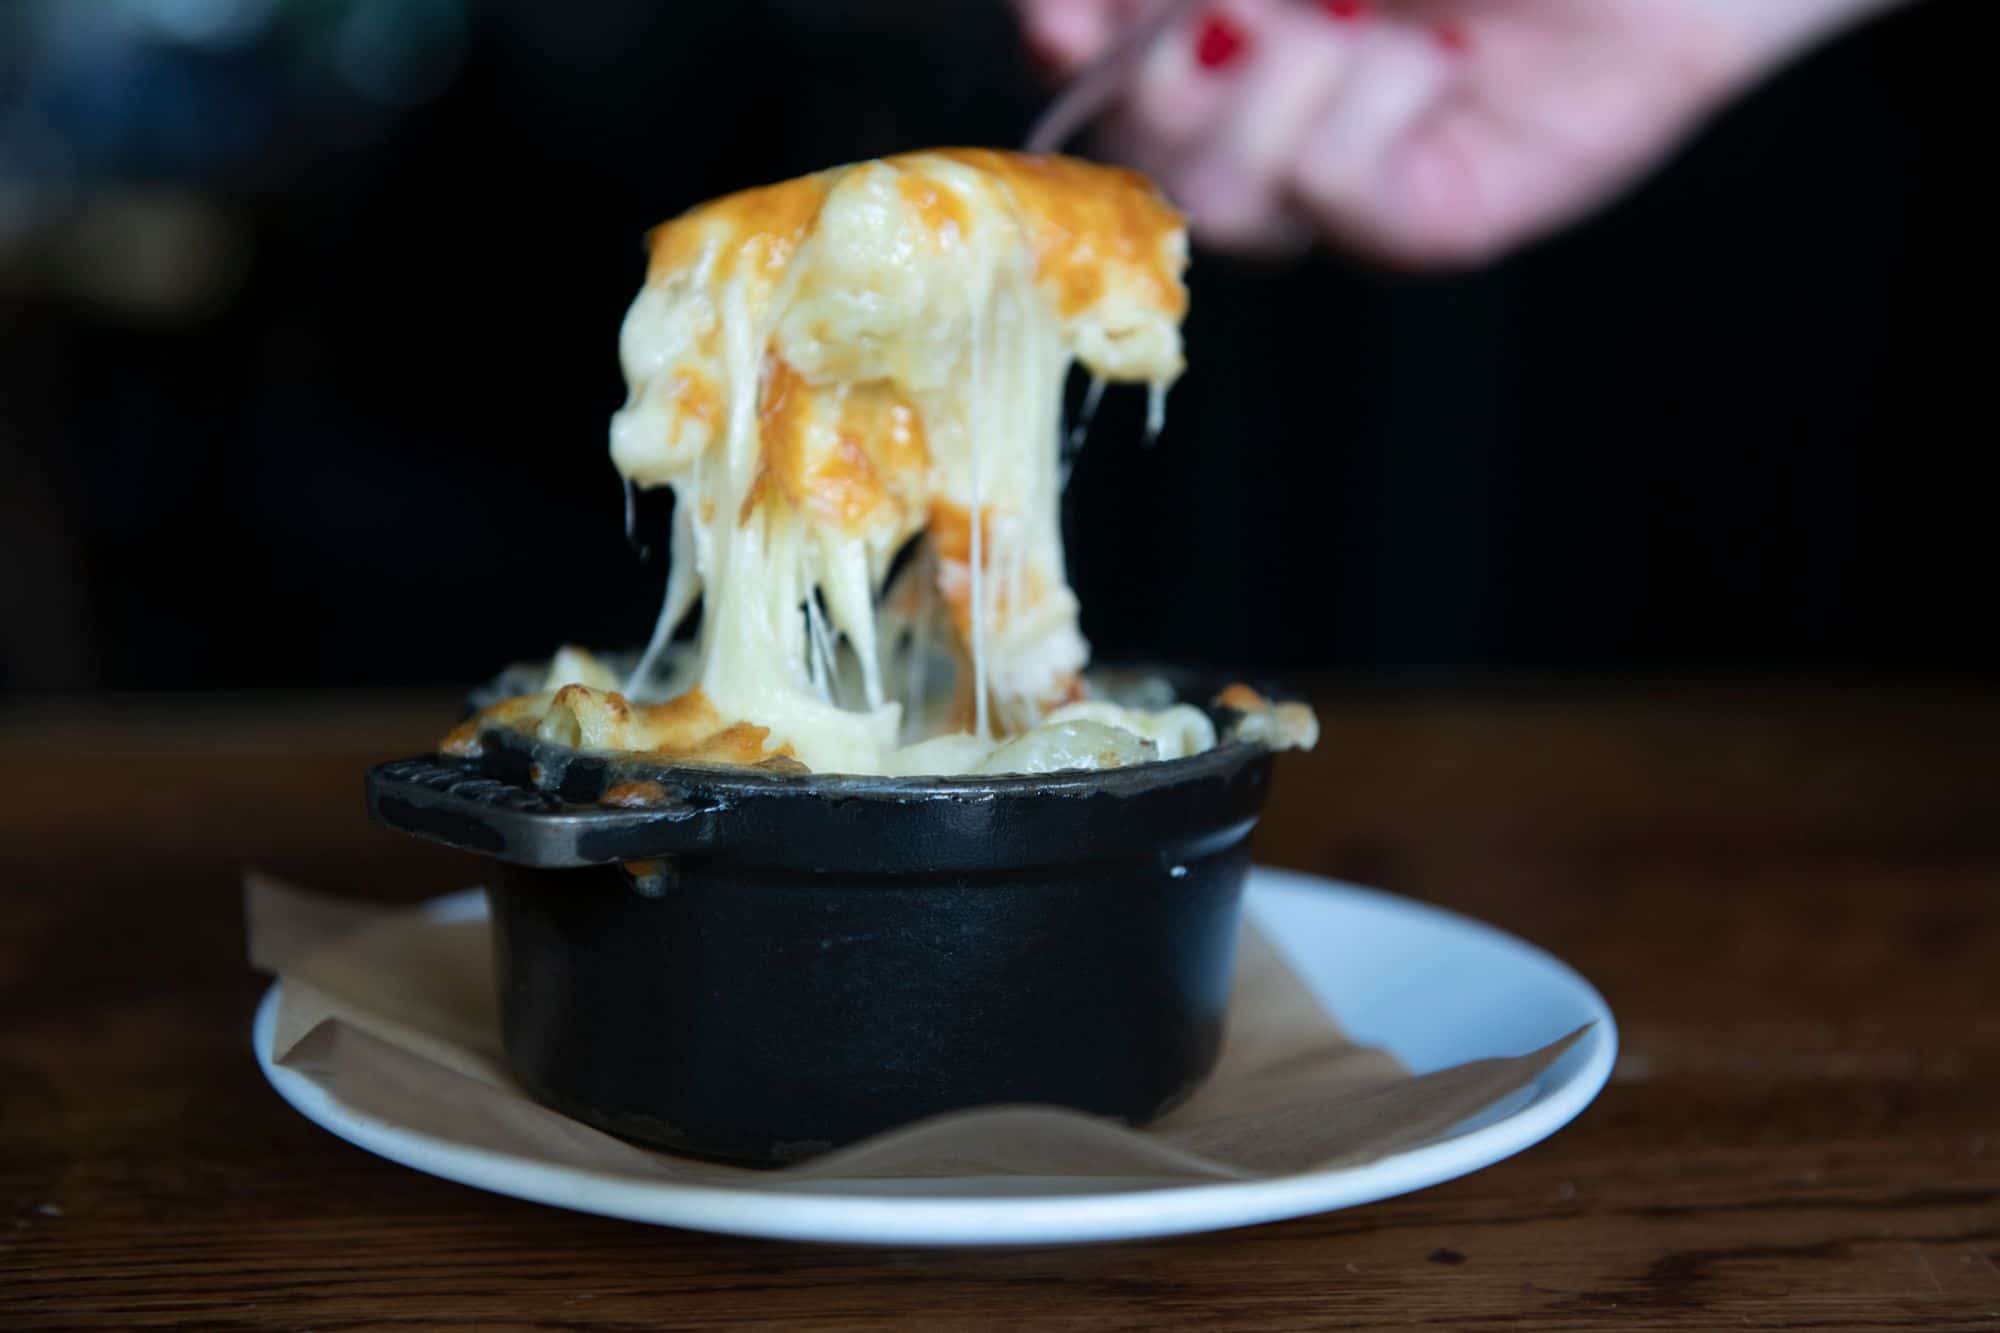 The melt in the mouth short-Rib Mac n’ Cheese at the Coal Shed Brighton. A hand with red painted nails holds up a fork full of food with molten cheese dripping stretching from the black iron dish below.